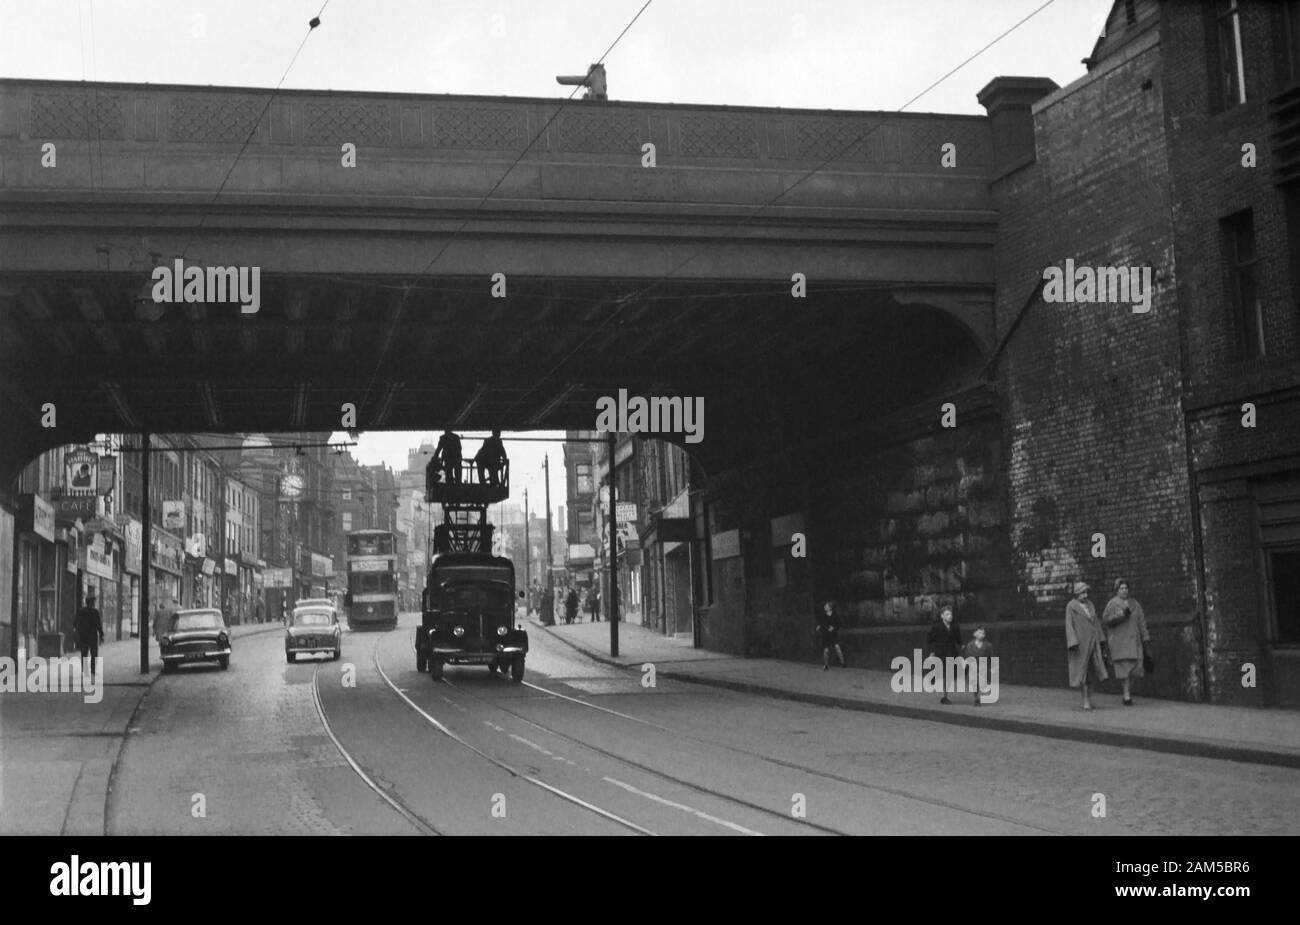 A Bedford Tower Wagon and maintenance team doing running repairs on the tram cables under the railway bridge HUL4/53 and next to the Viaduct pub, 11 Briggate City Centre, Leeds LS1 6ER. Image taken during the late 1950s before the decommissioning of the Tramway Network. The area nowadays is known as the Leeds village and popular with the LGBT community. The railway bridge was painted in the Pride colours in 2017 and also known as the Leeds Freedom Bridge. Stock Photo